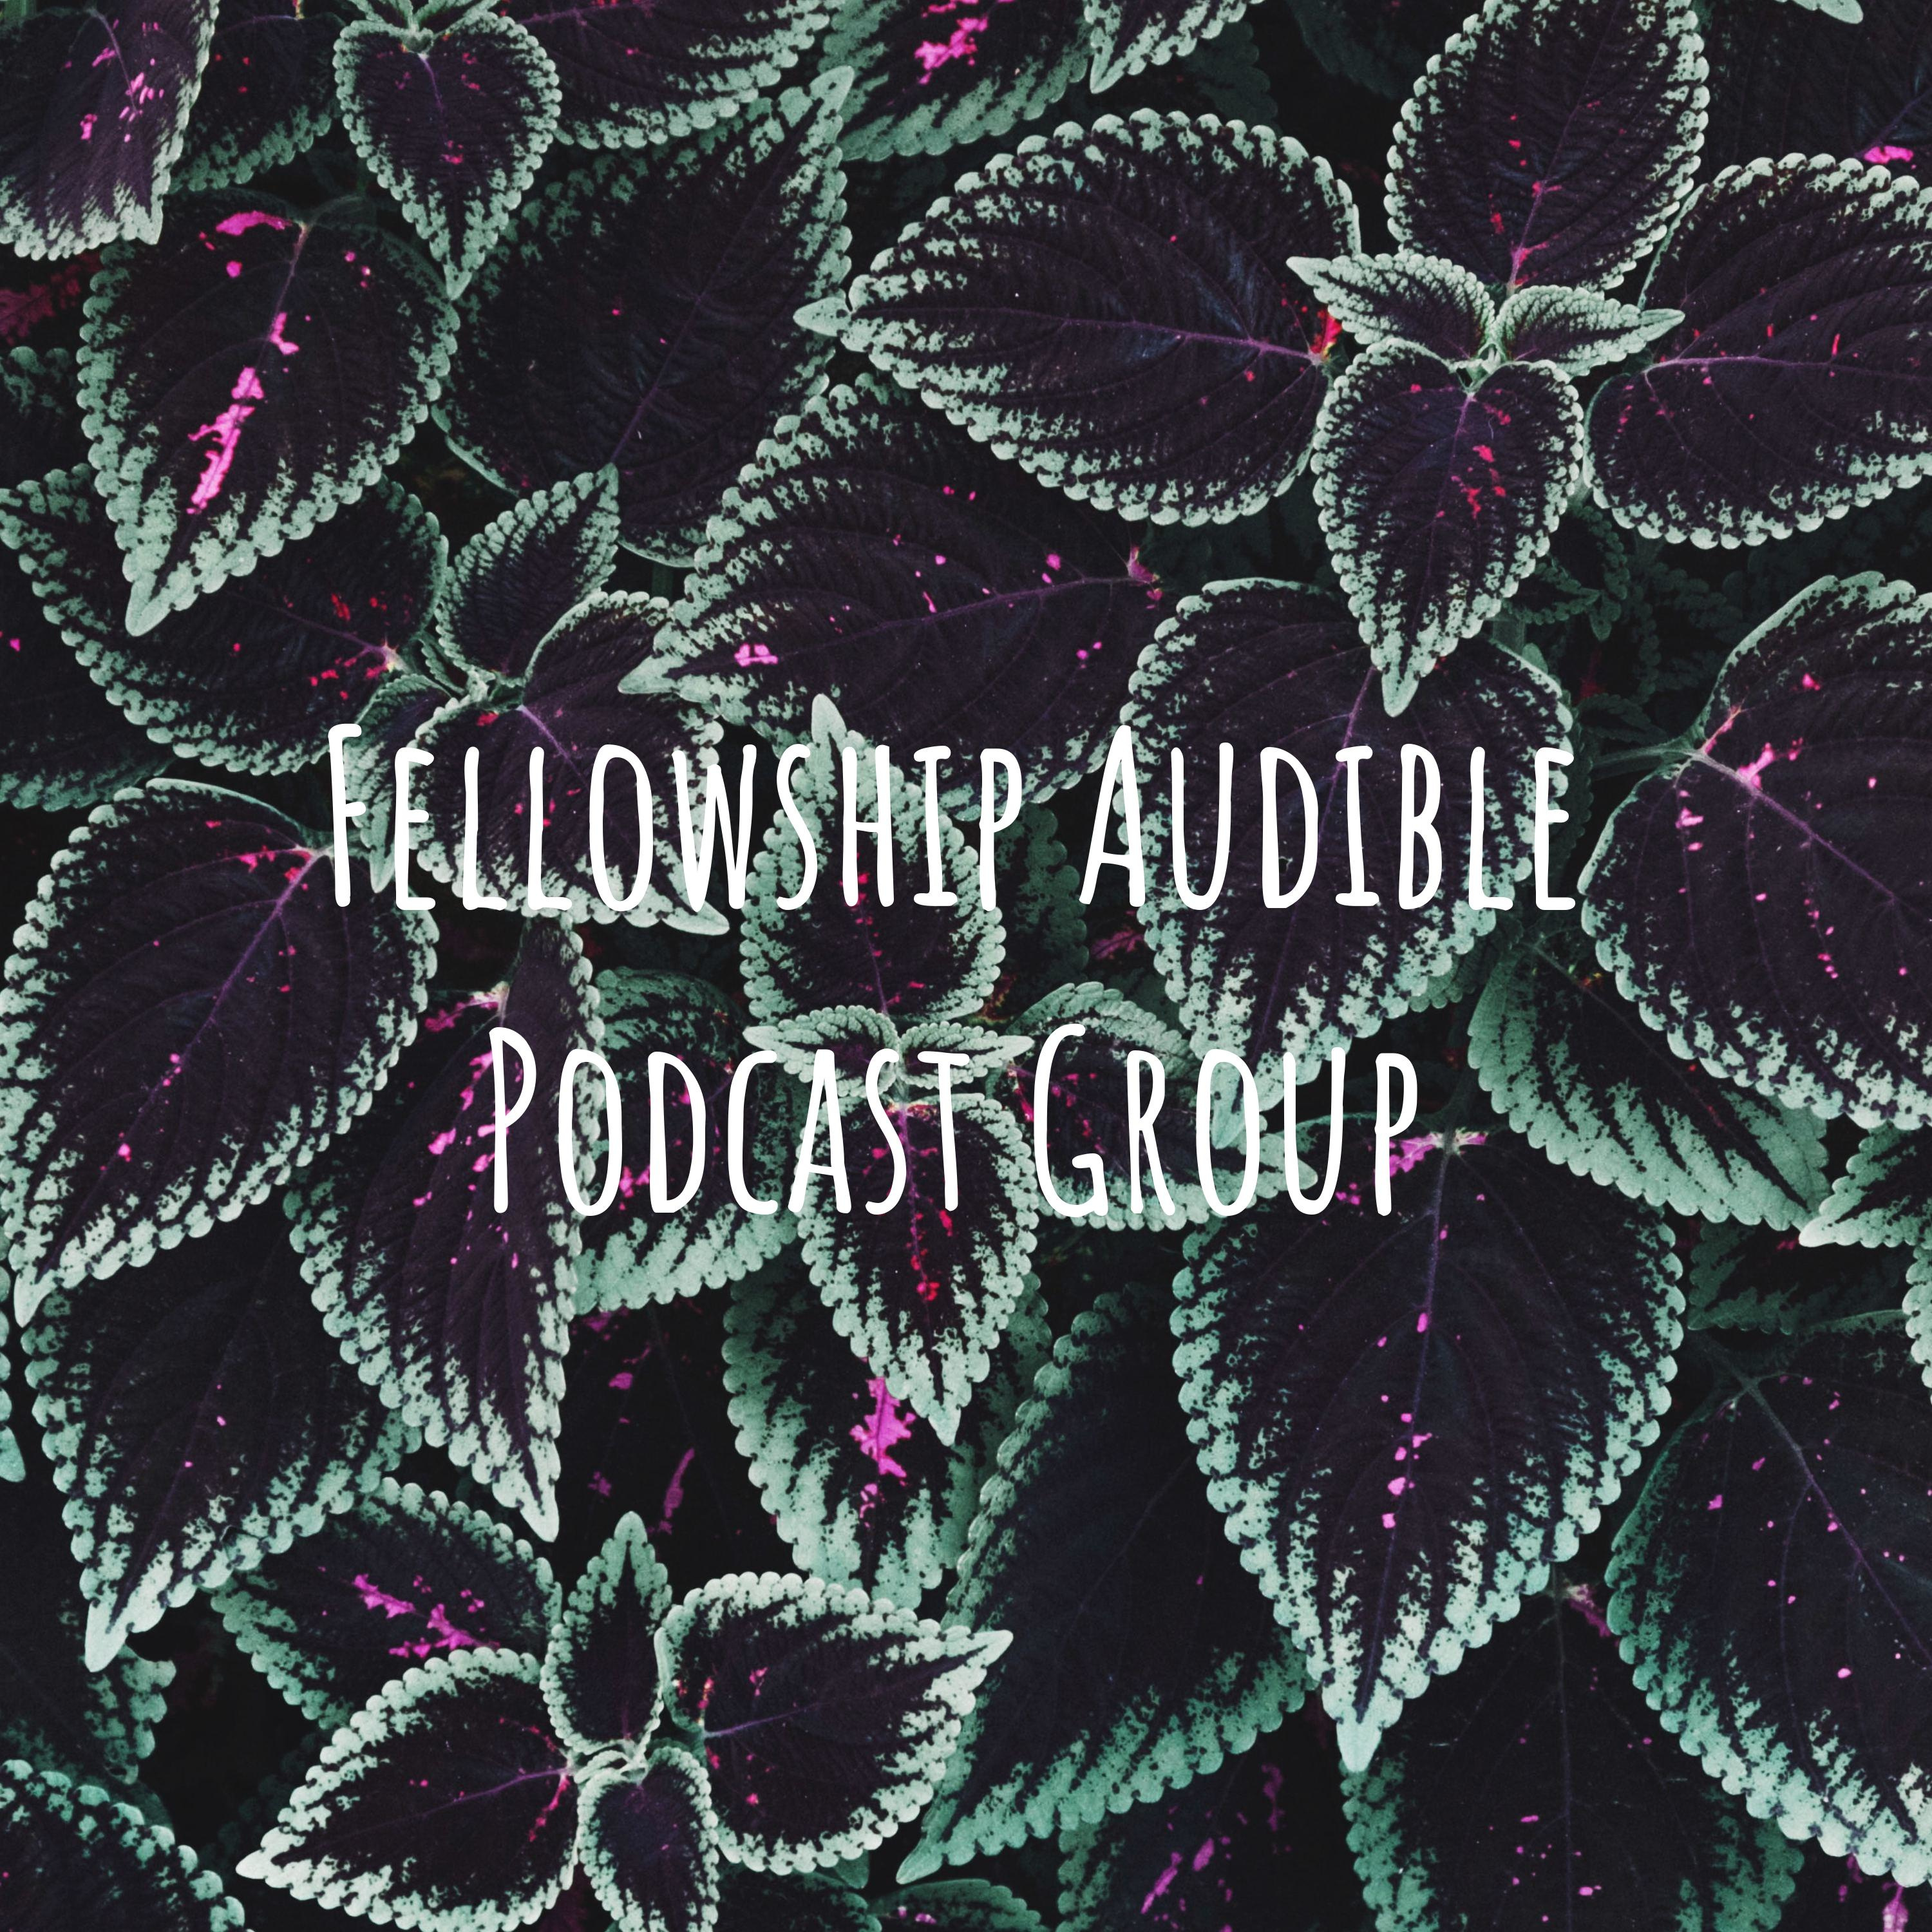 Fellowship Audio Podcast 18FEB19 | Los Angeles Guide